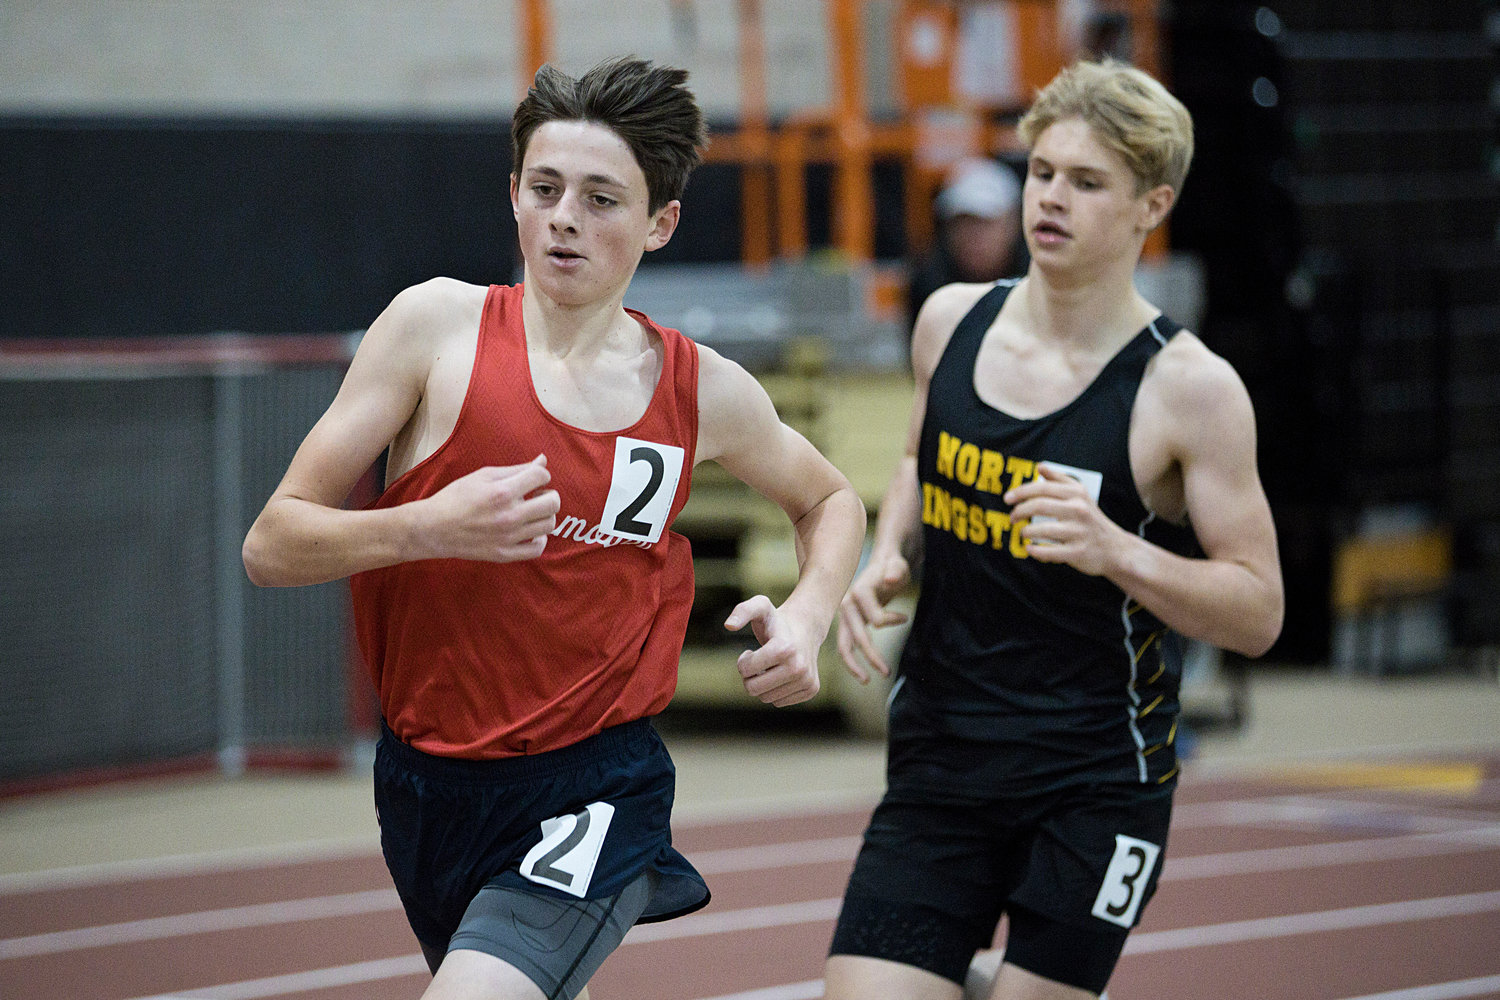 Portsmouth’s Sean Gray races ahead of a North Kingstown opponent while going on to win the 1,500-meter race with a time of 4:33.84.